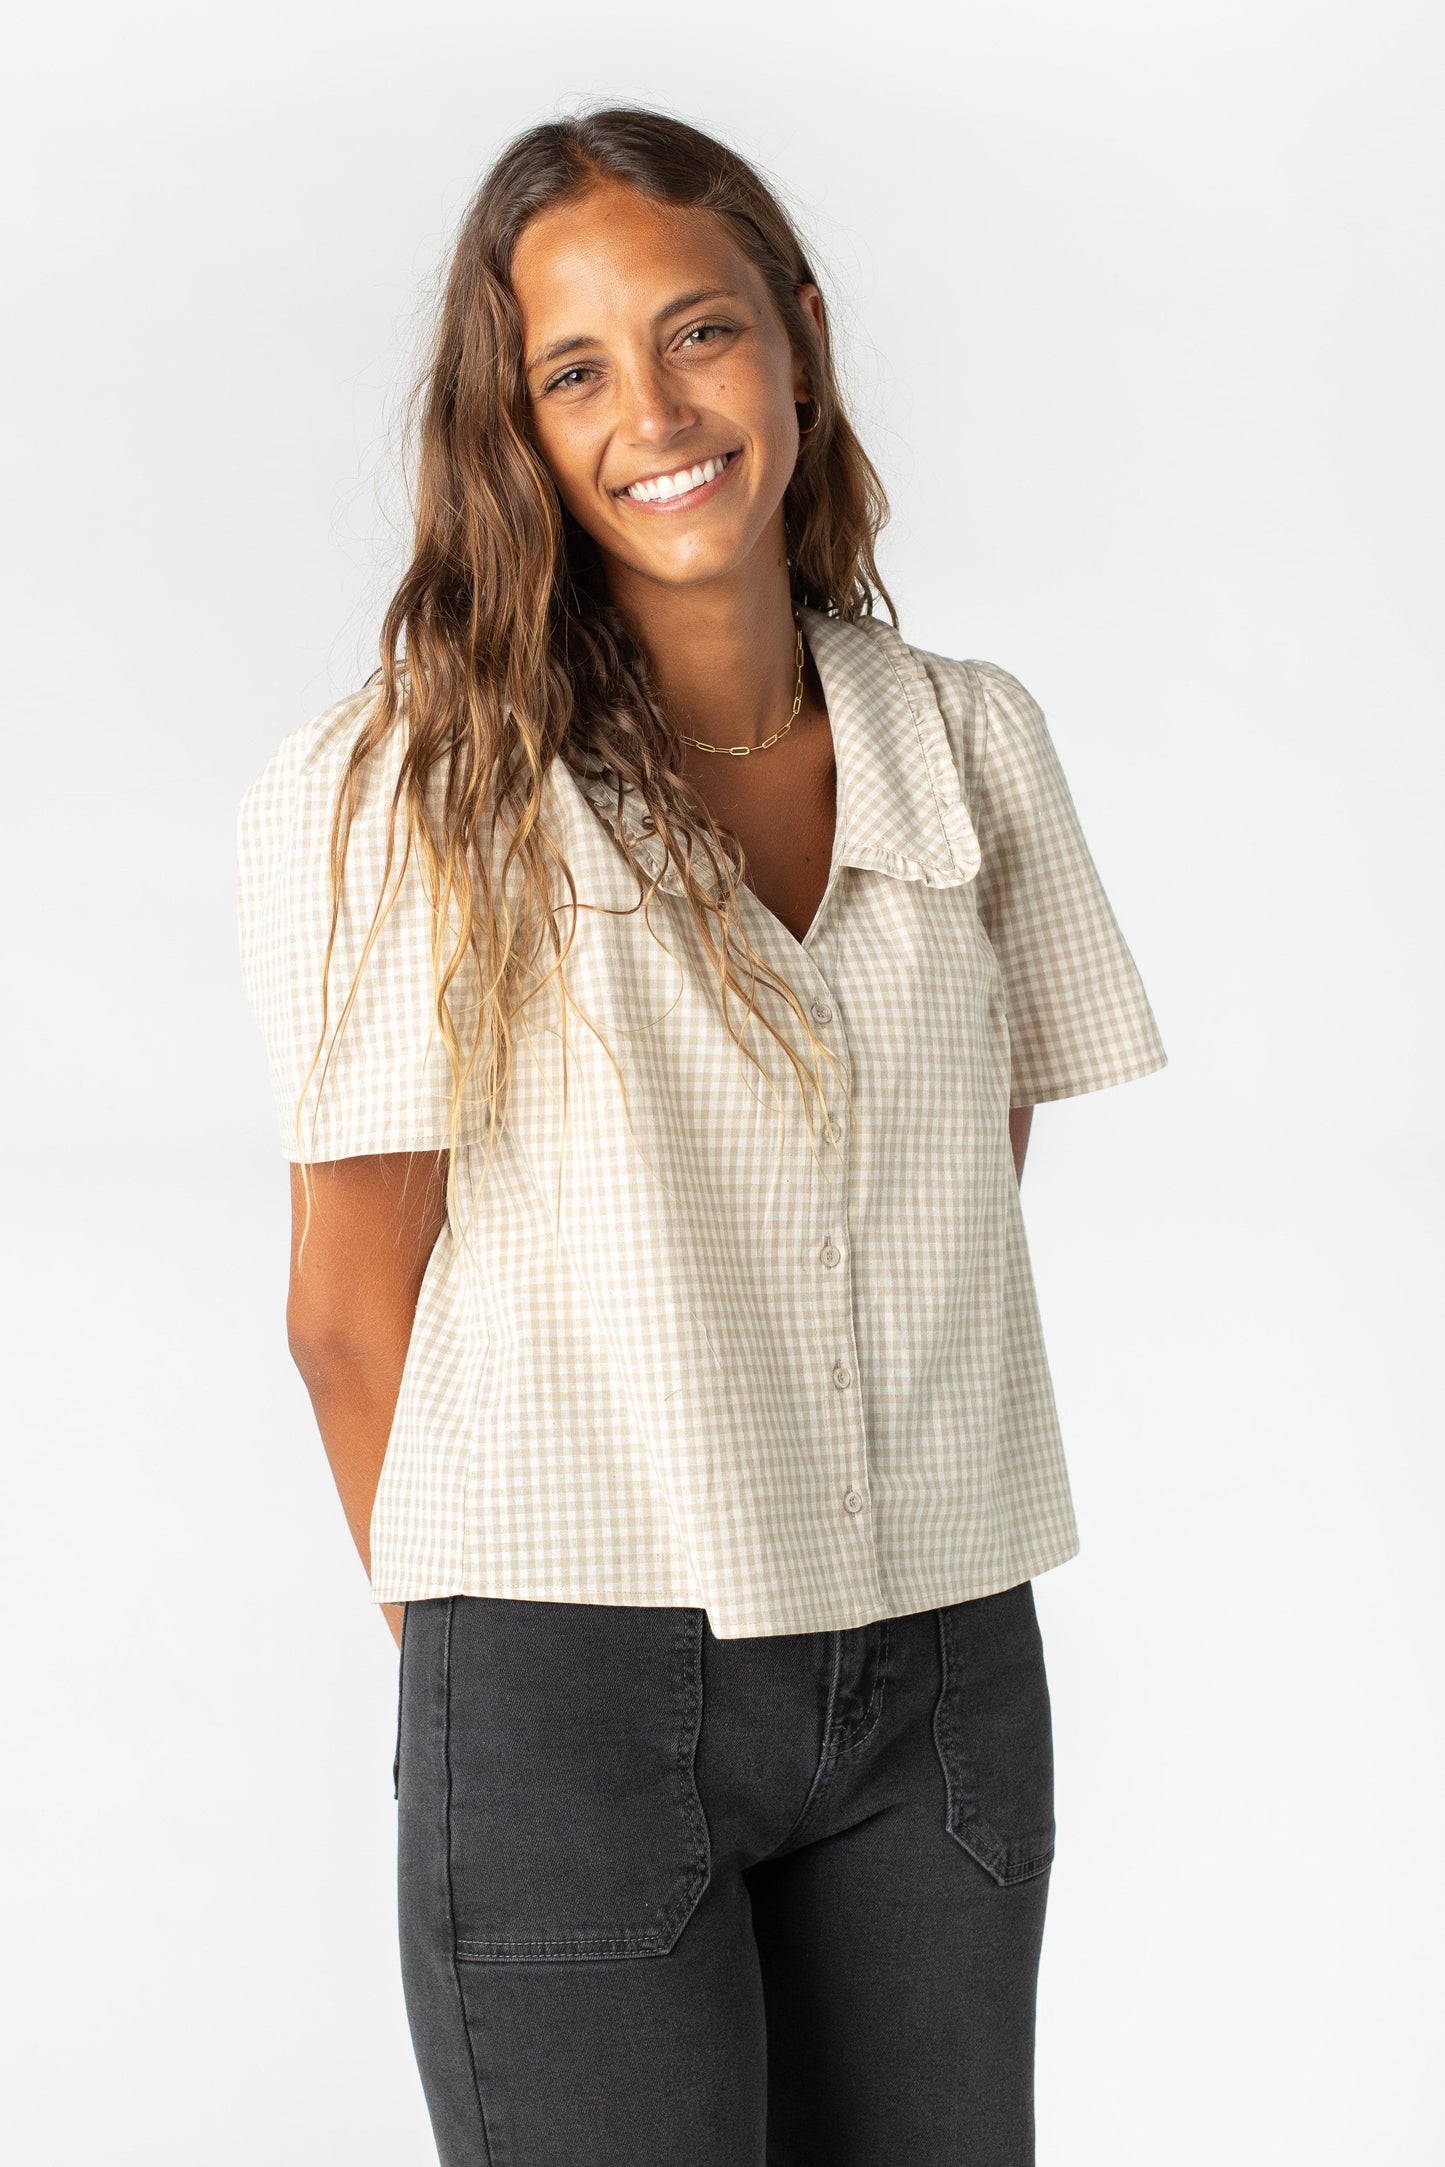 Brass & Roe The Forever Collared Top WOMEN'S TOP brass & roe Taupe L 